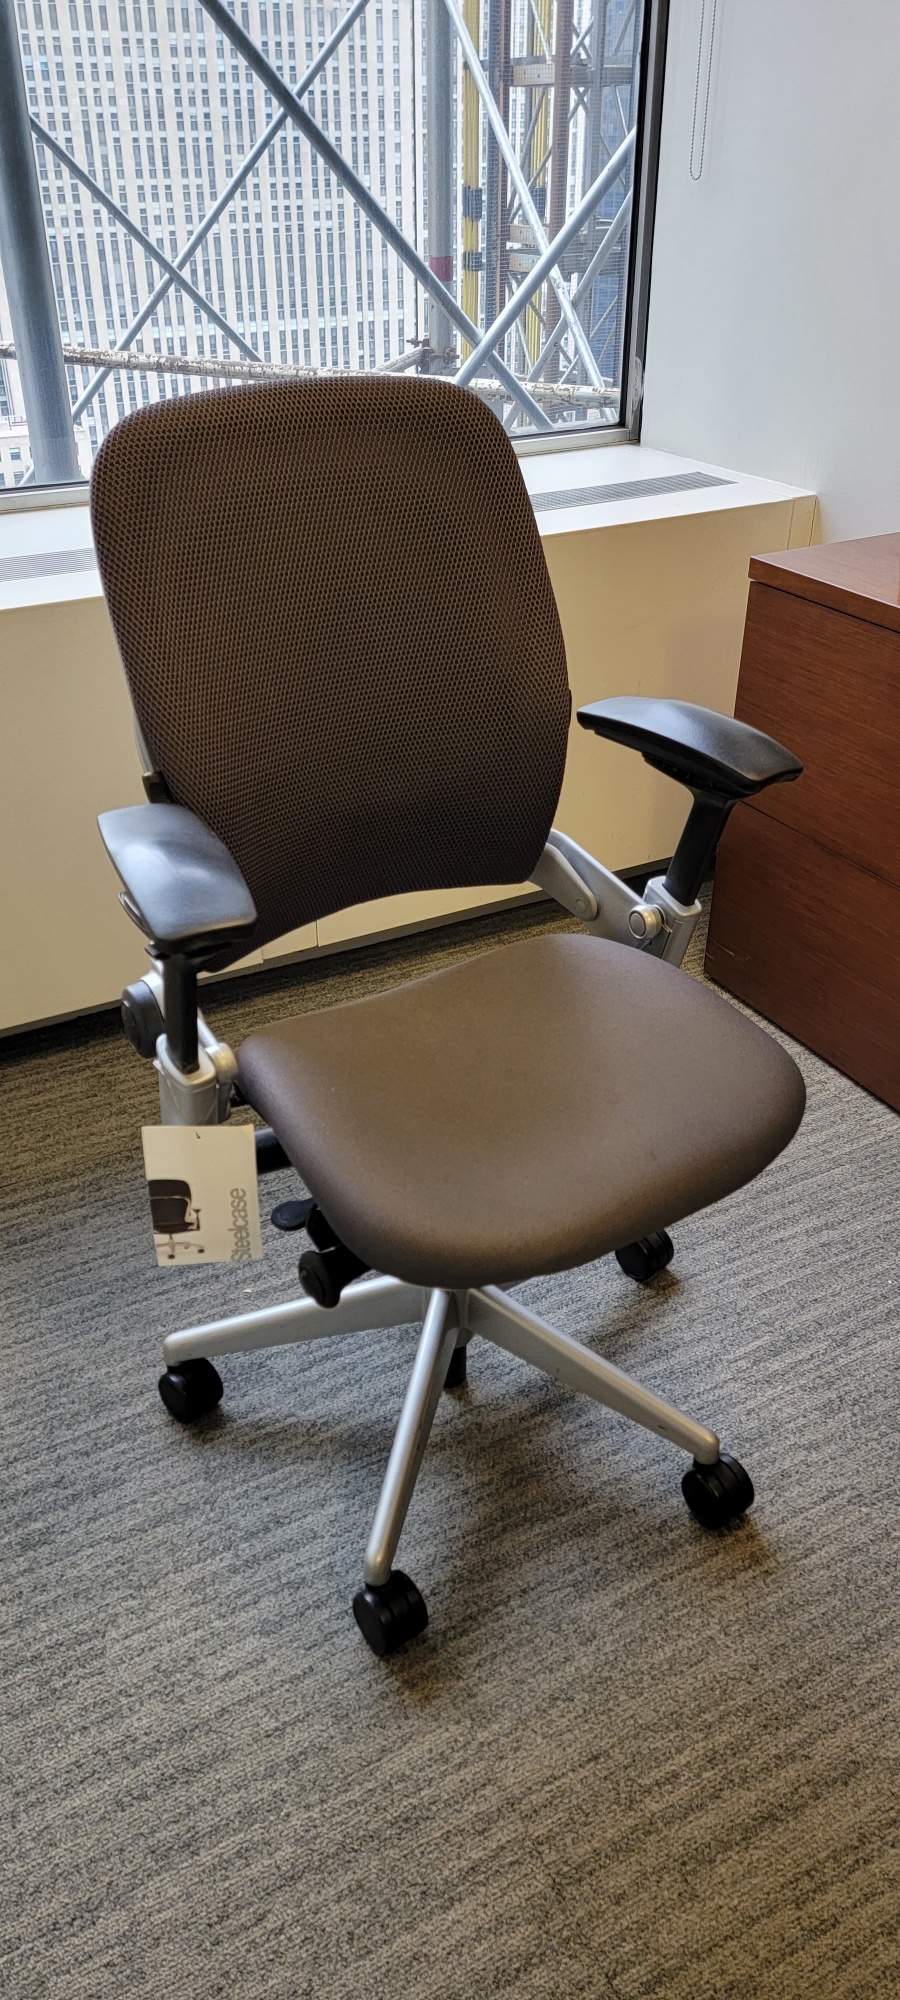 C61666 - Steelcase Leap Chairs-Version 2